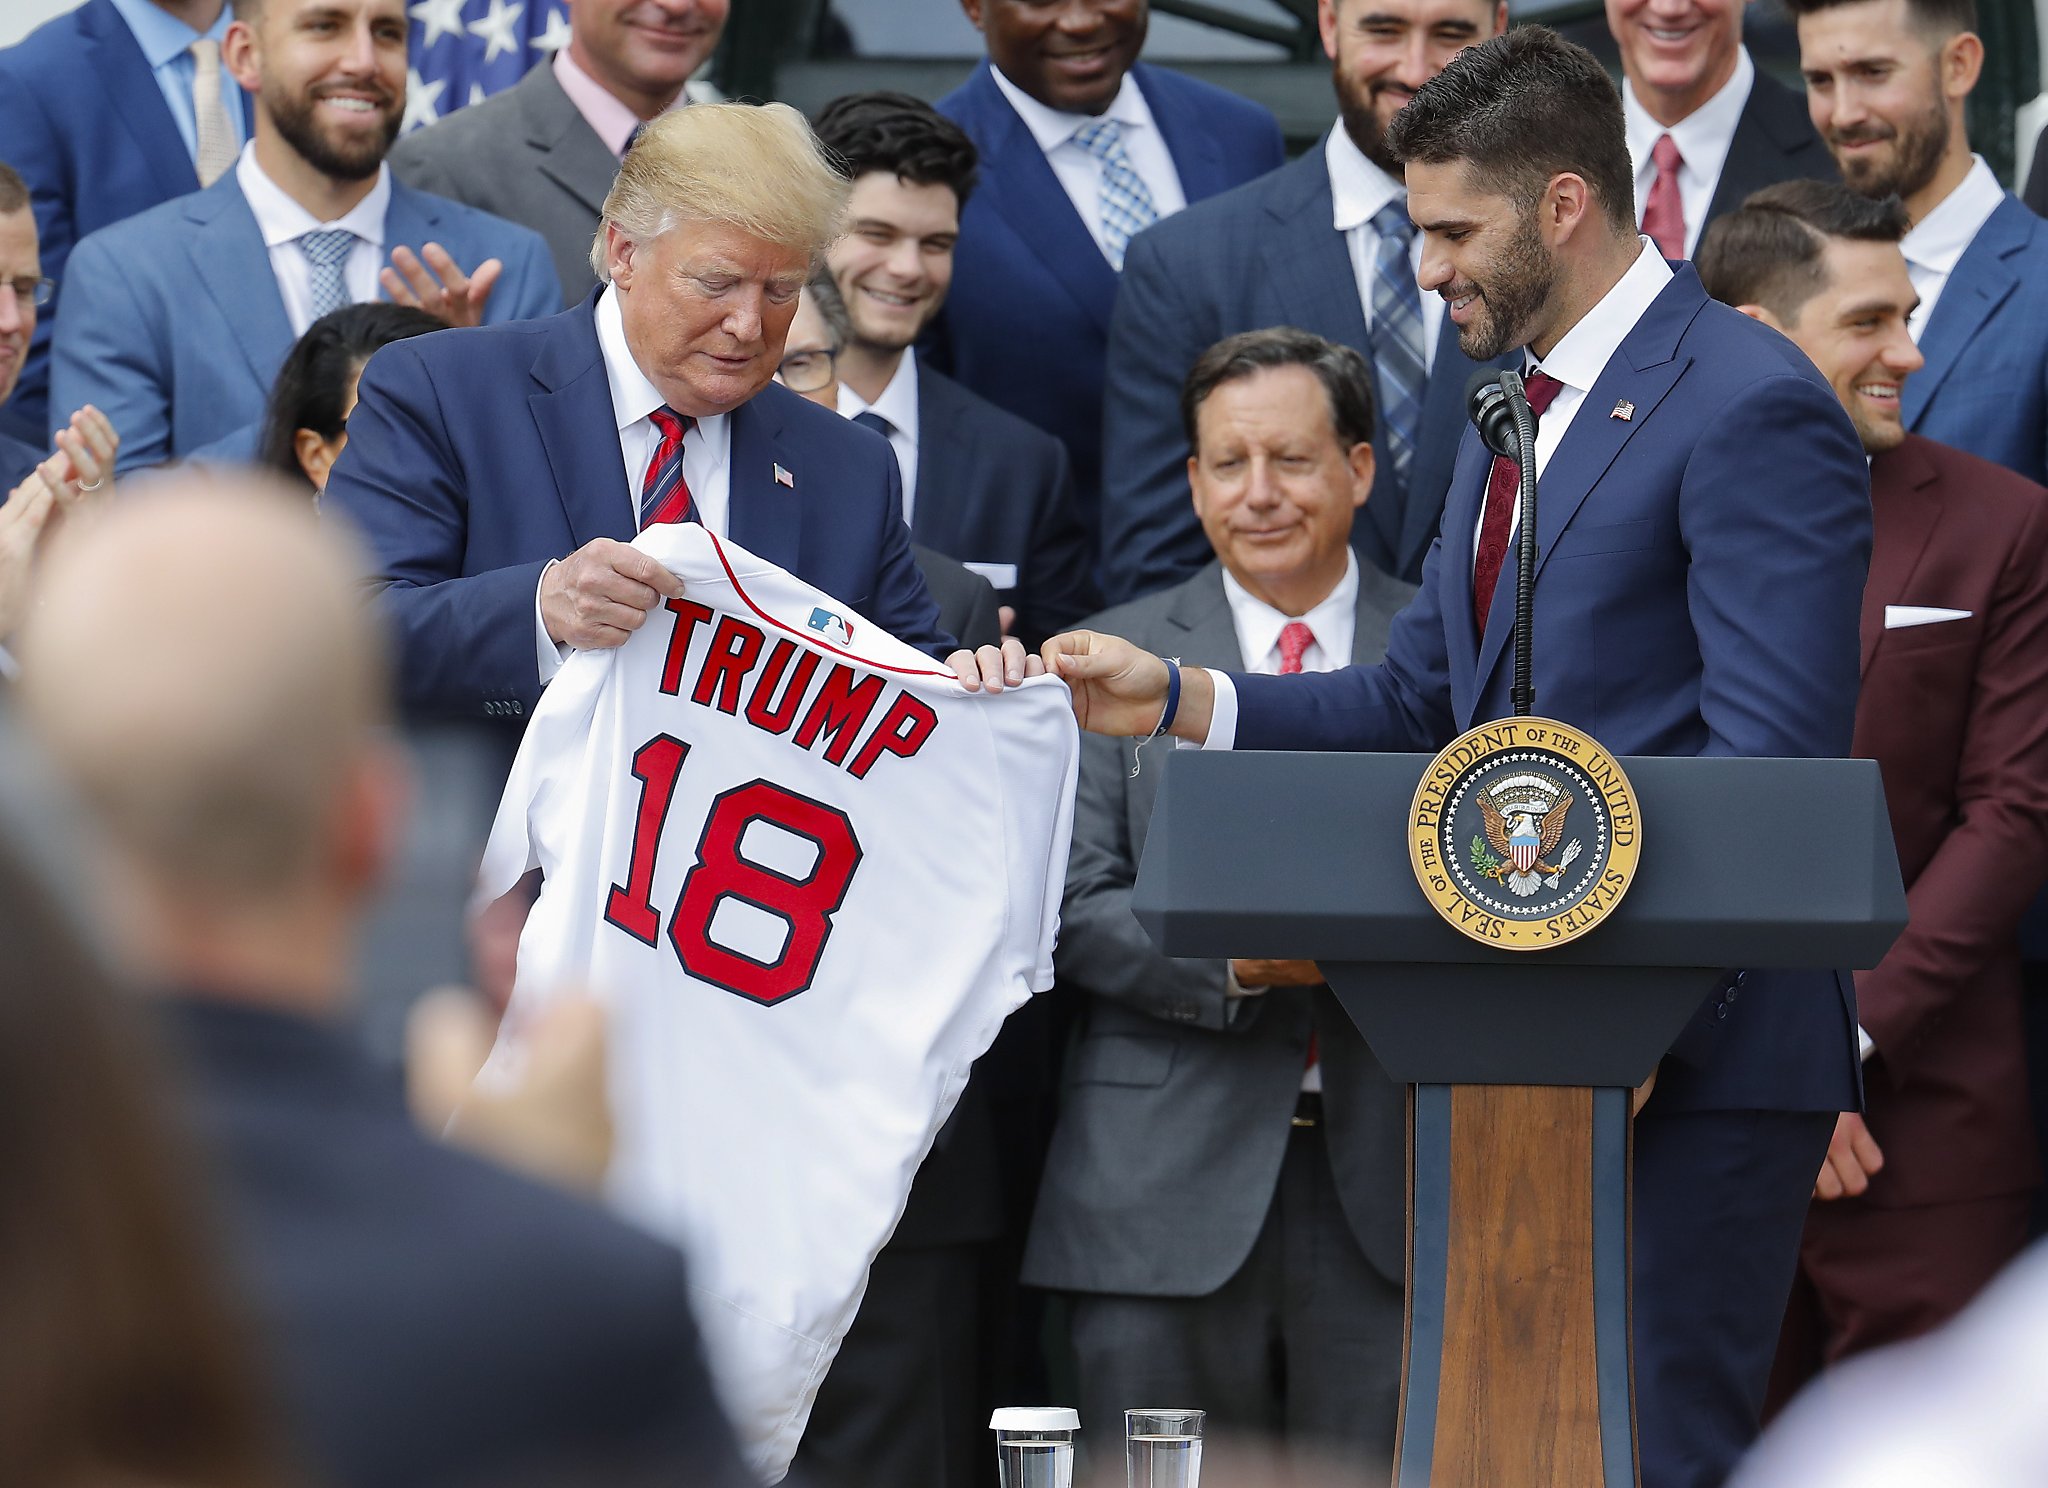 Red Sox manager won't attend White House ceremony